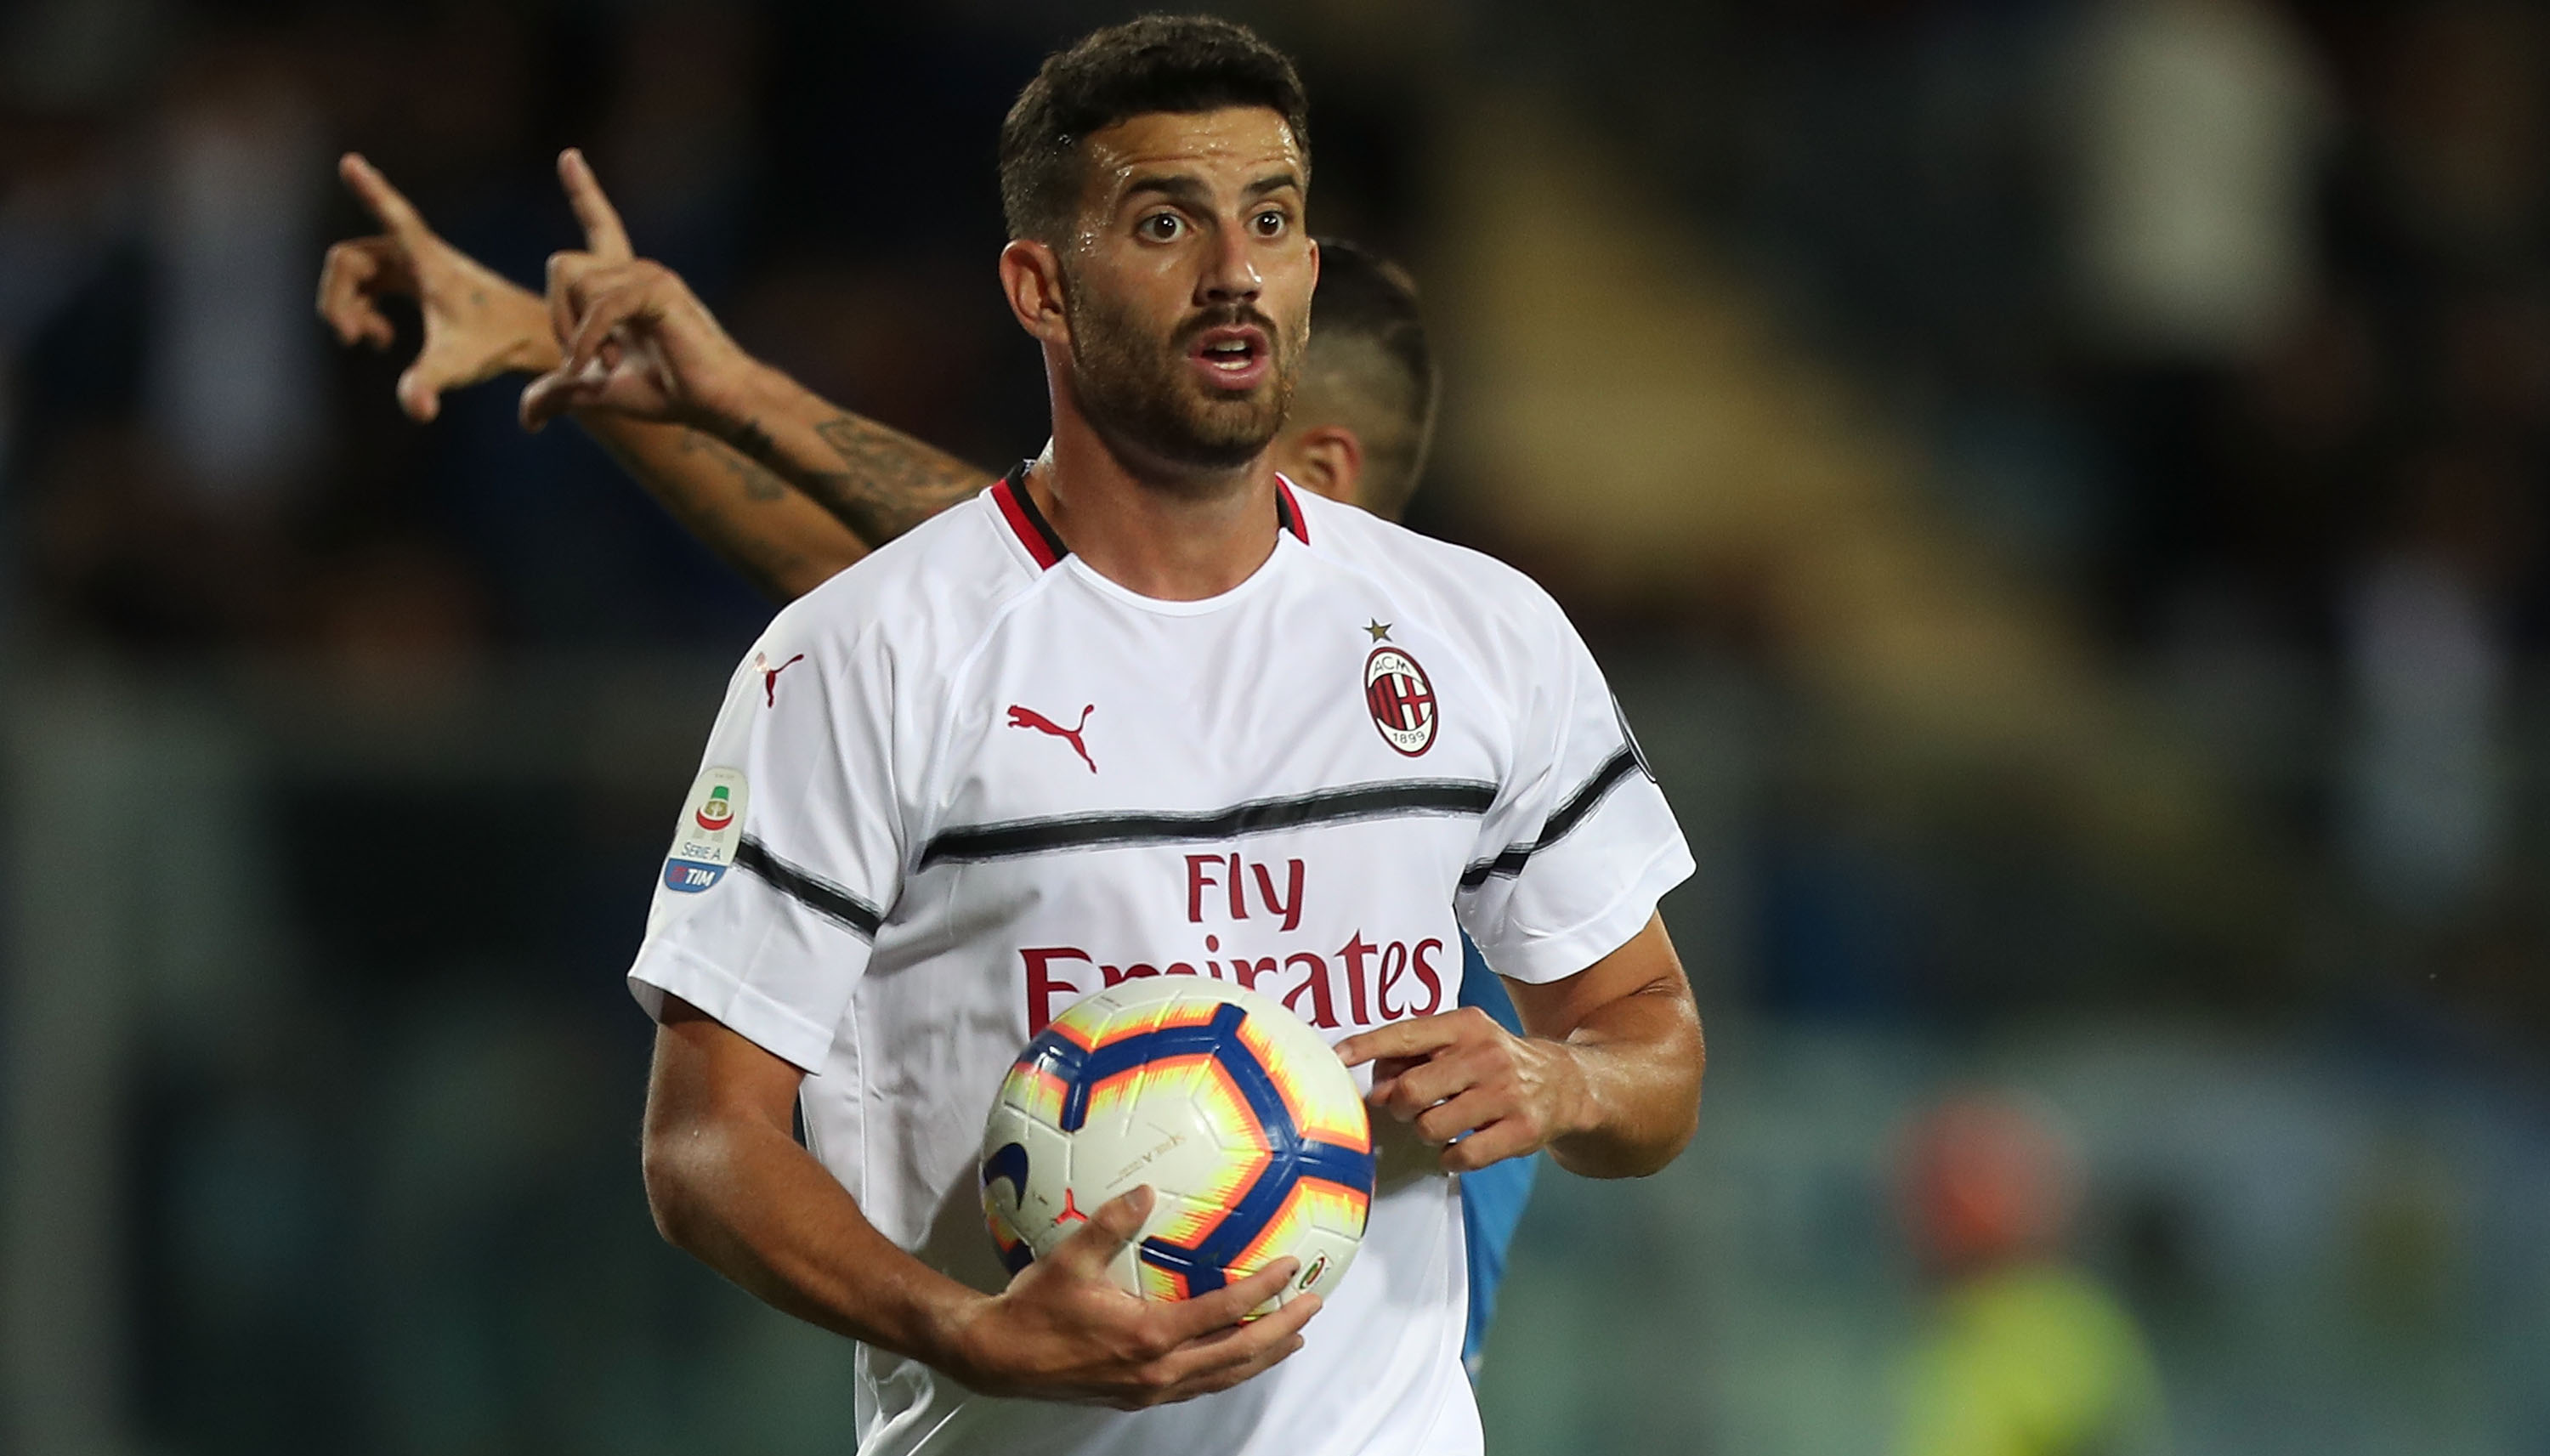 EMPOLI, ITALY - SEPTEMBER 27: Mateo Musacchio of AC Milan reacts during the serie A match between Empoli and AC Milan at Stadio Carlo Castellani on September 27, 2018 in Empoli, Italy. (Photo by Gabriele Maltinti/Getty Images)